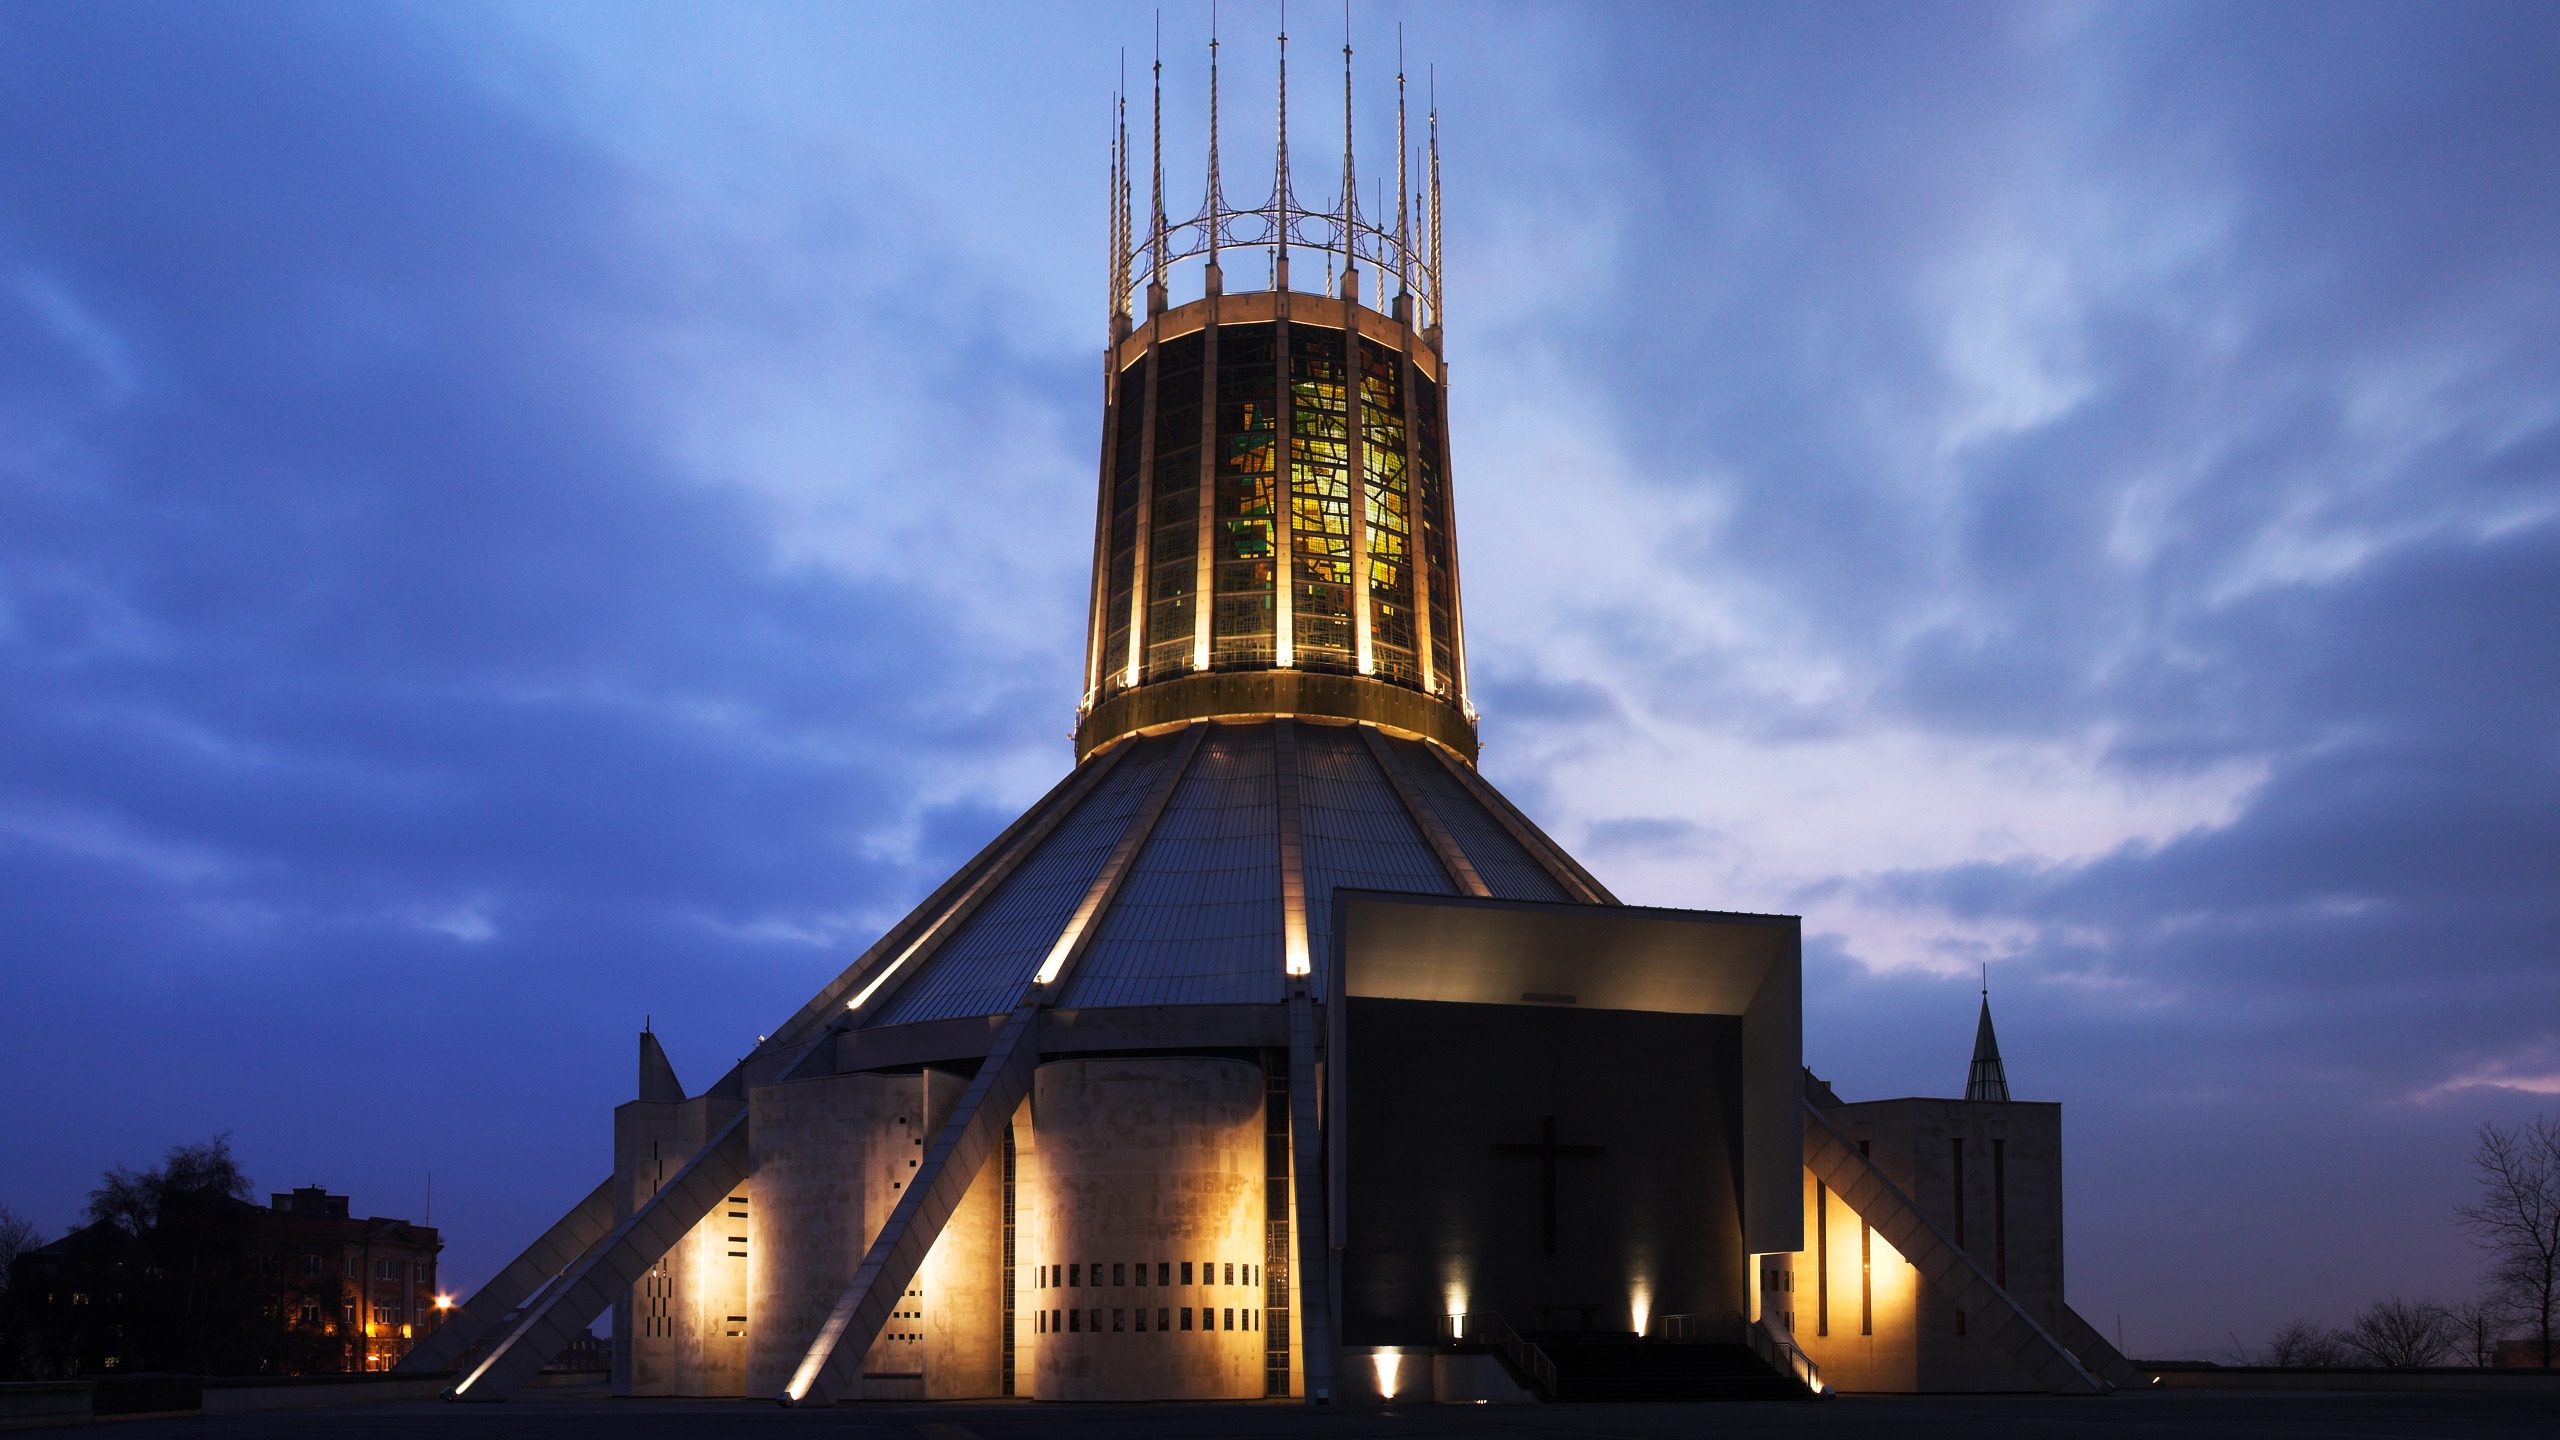 Liverpool Metropolitan Cathedral for 2560x1440 HDTV resolution